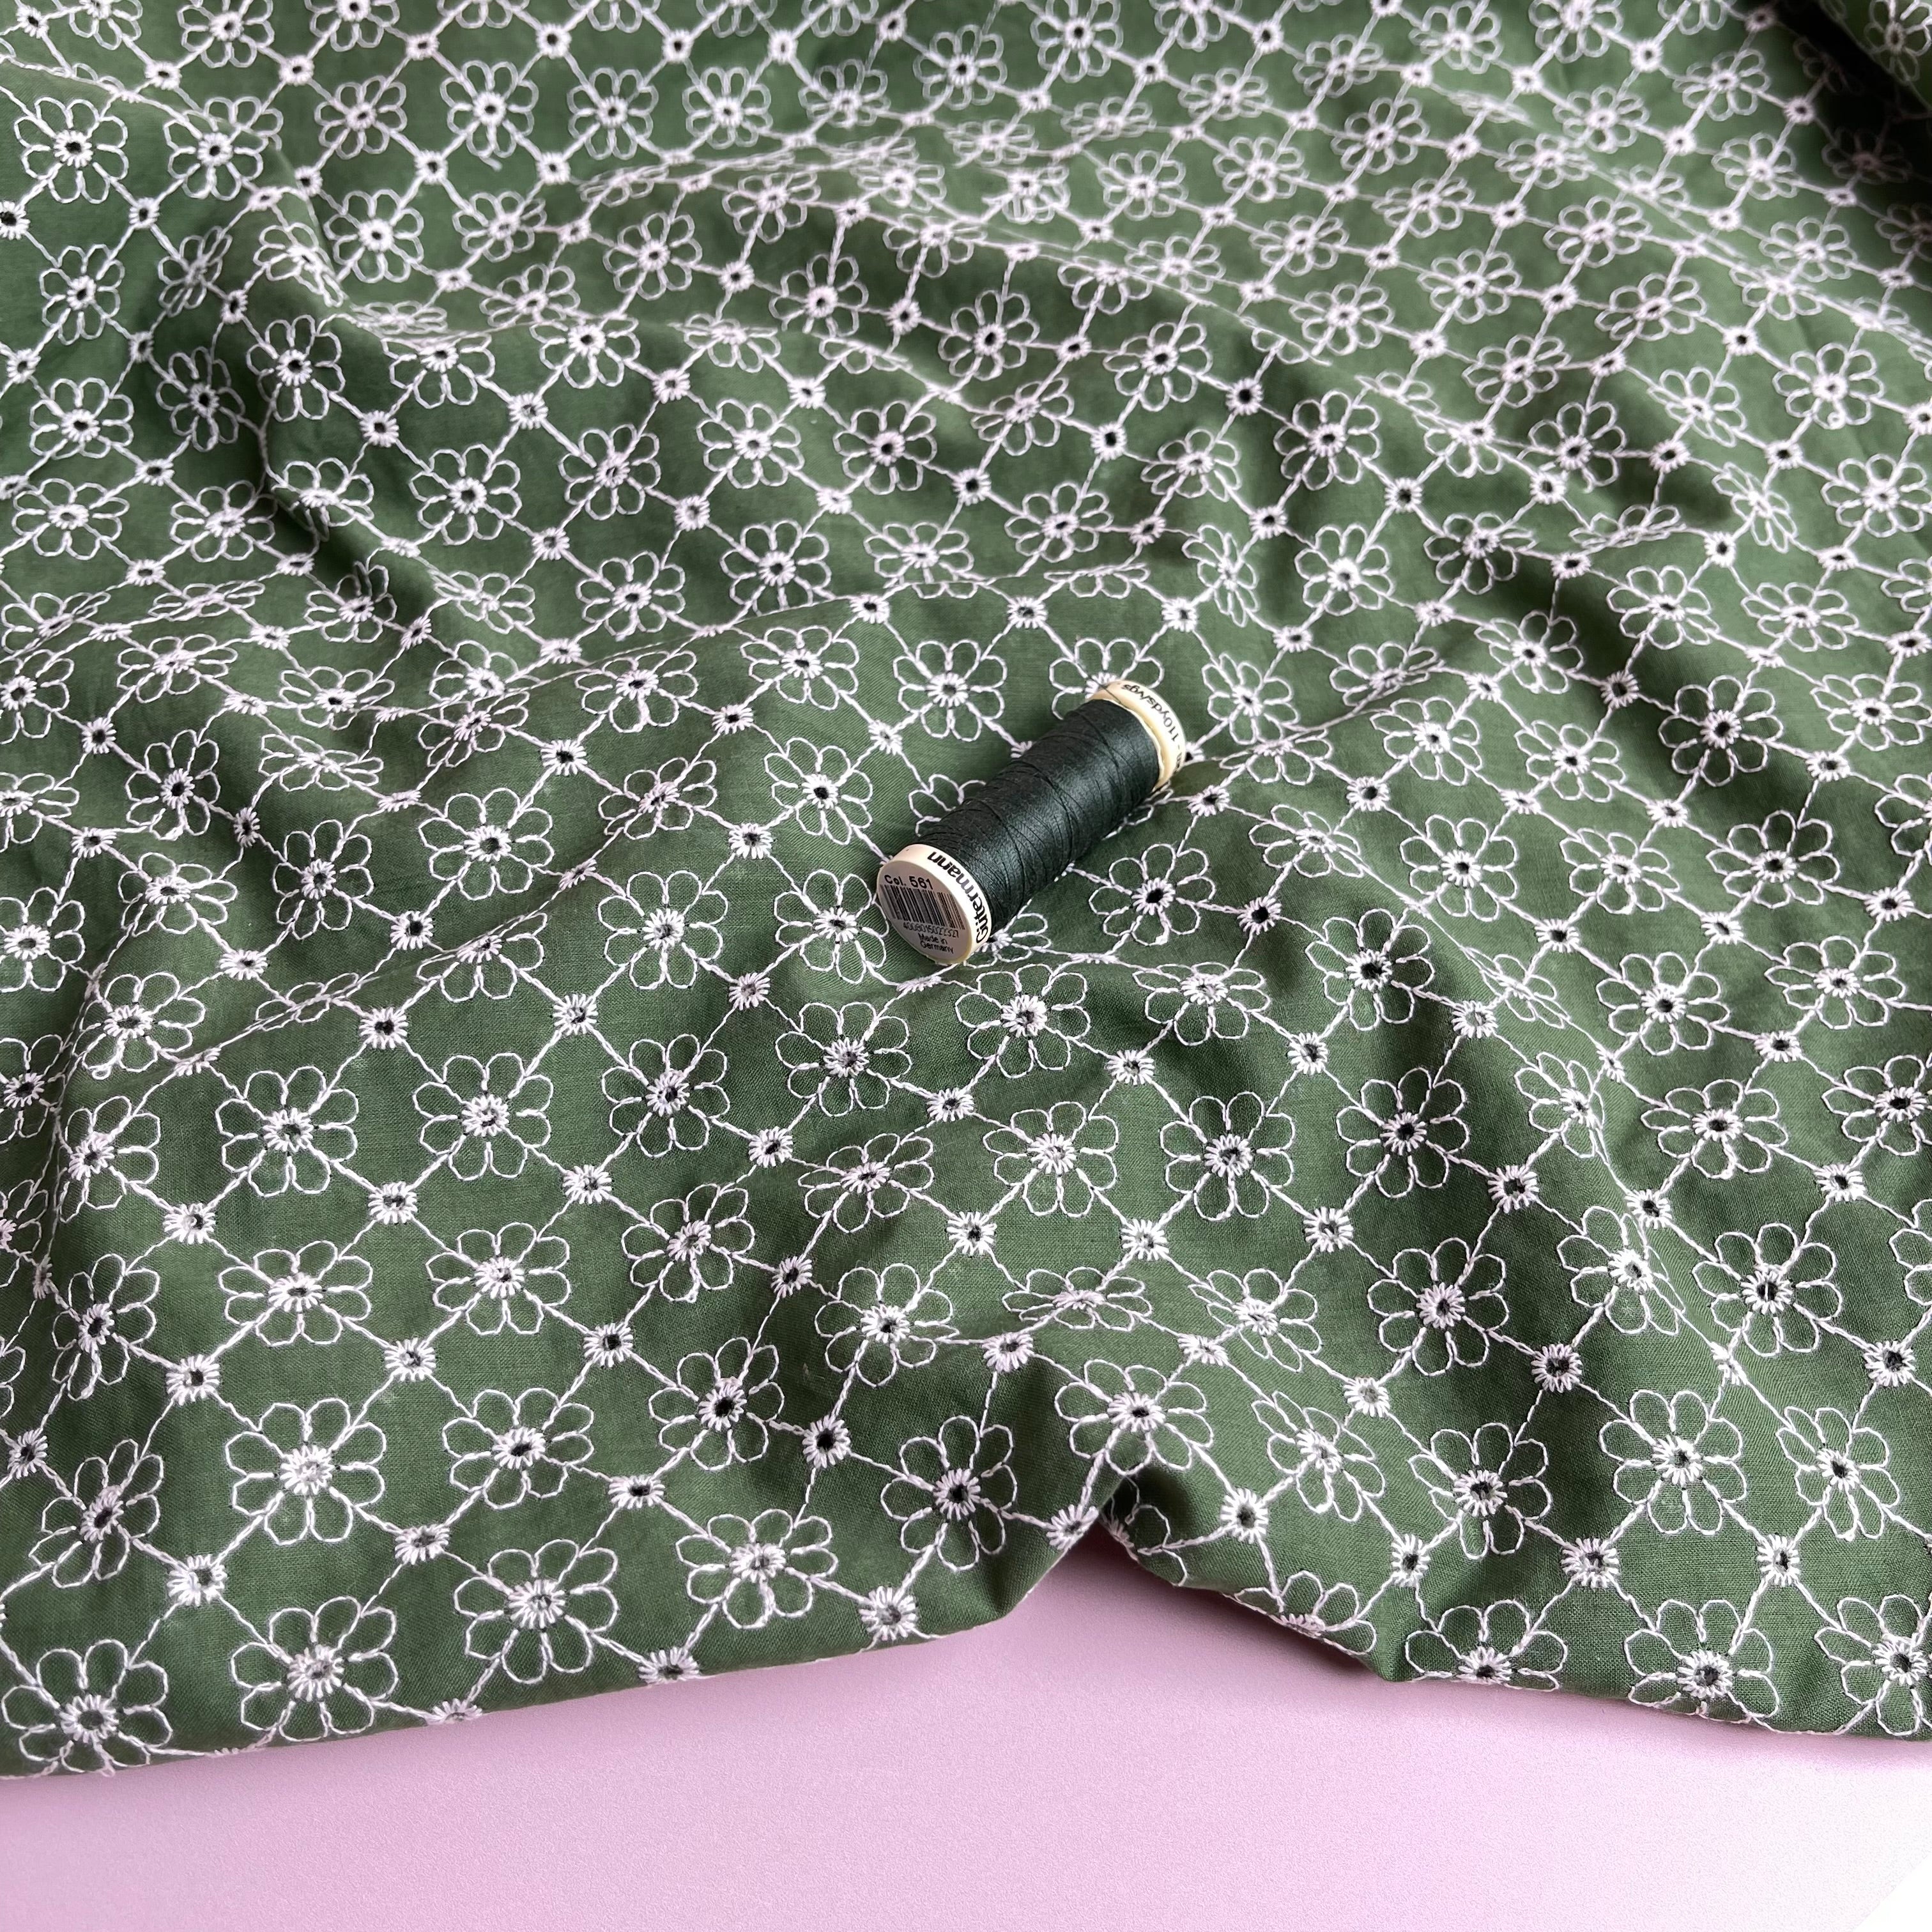 REMNANT 0.52 Metre - Embroidered Daisy Chain on Green Cotton Fabric